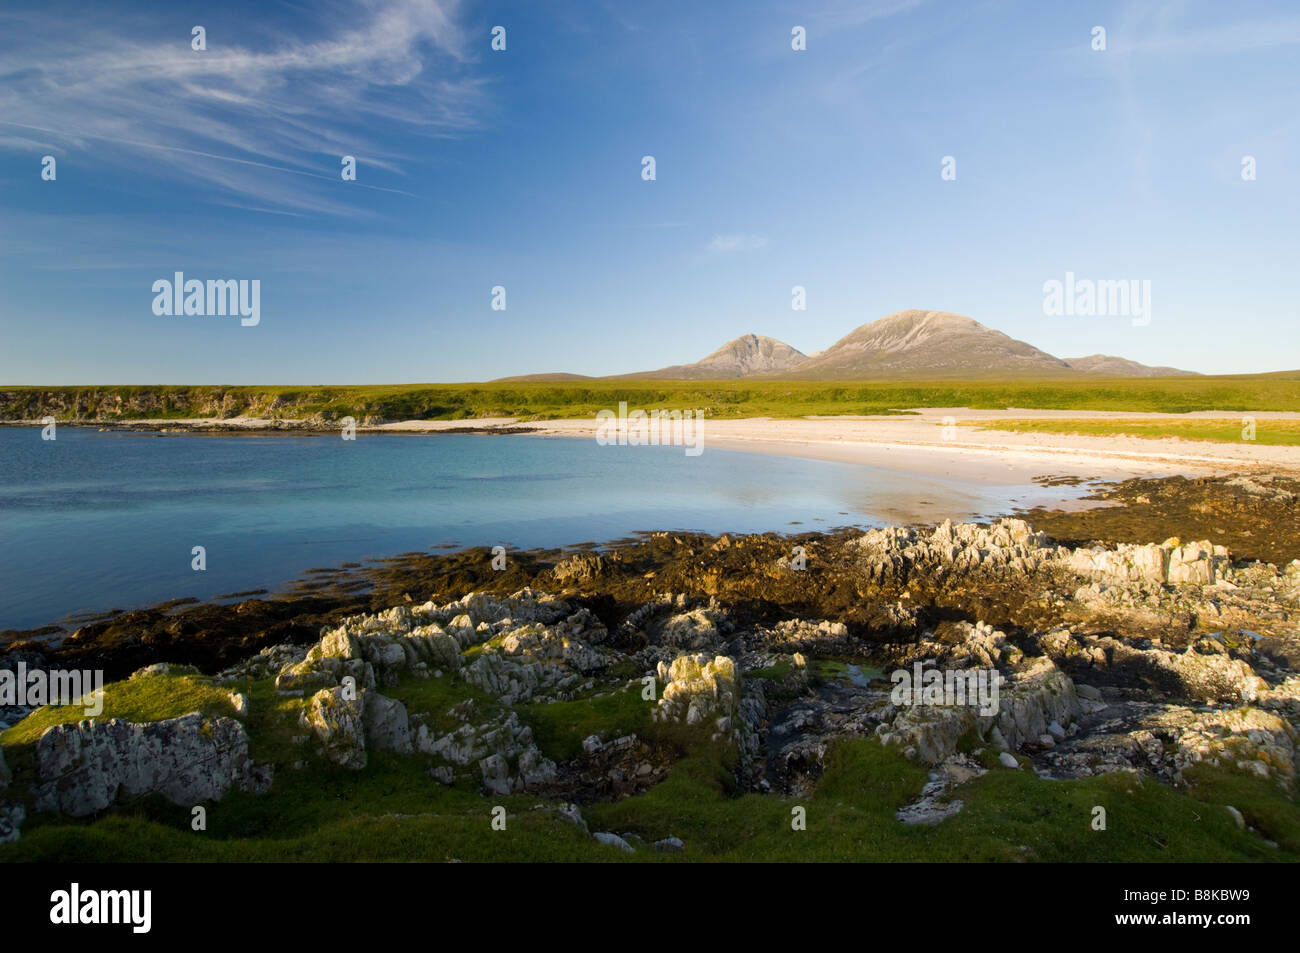 The bay at Inver on the Isle of Jura, looking across a raised beach to the Paps of Jura, Scotland. Stock Photo